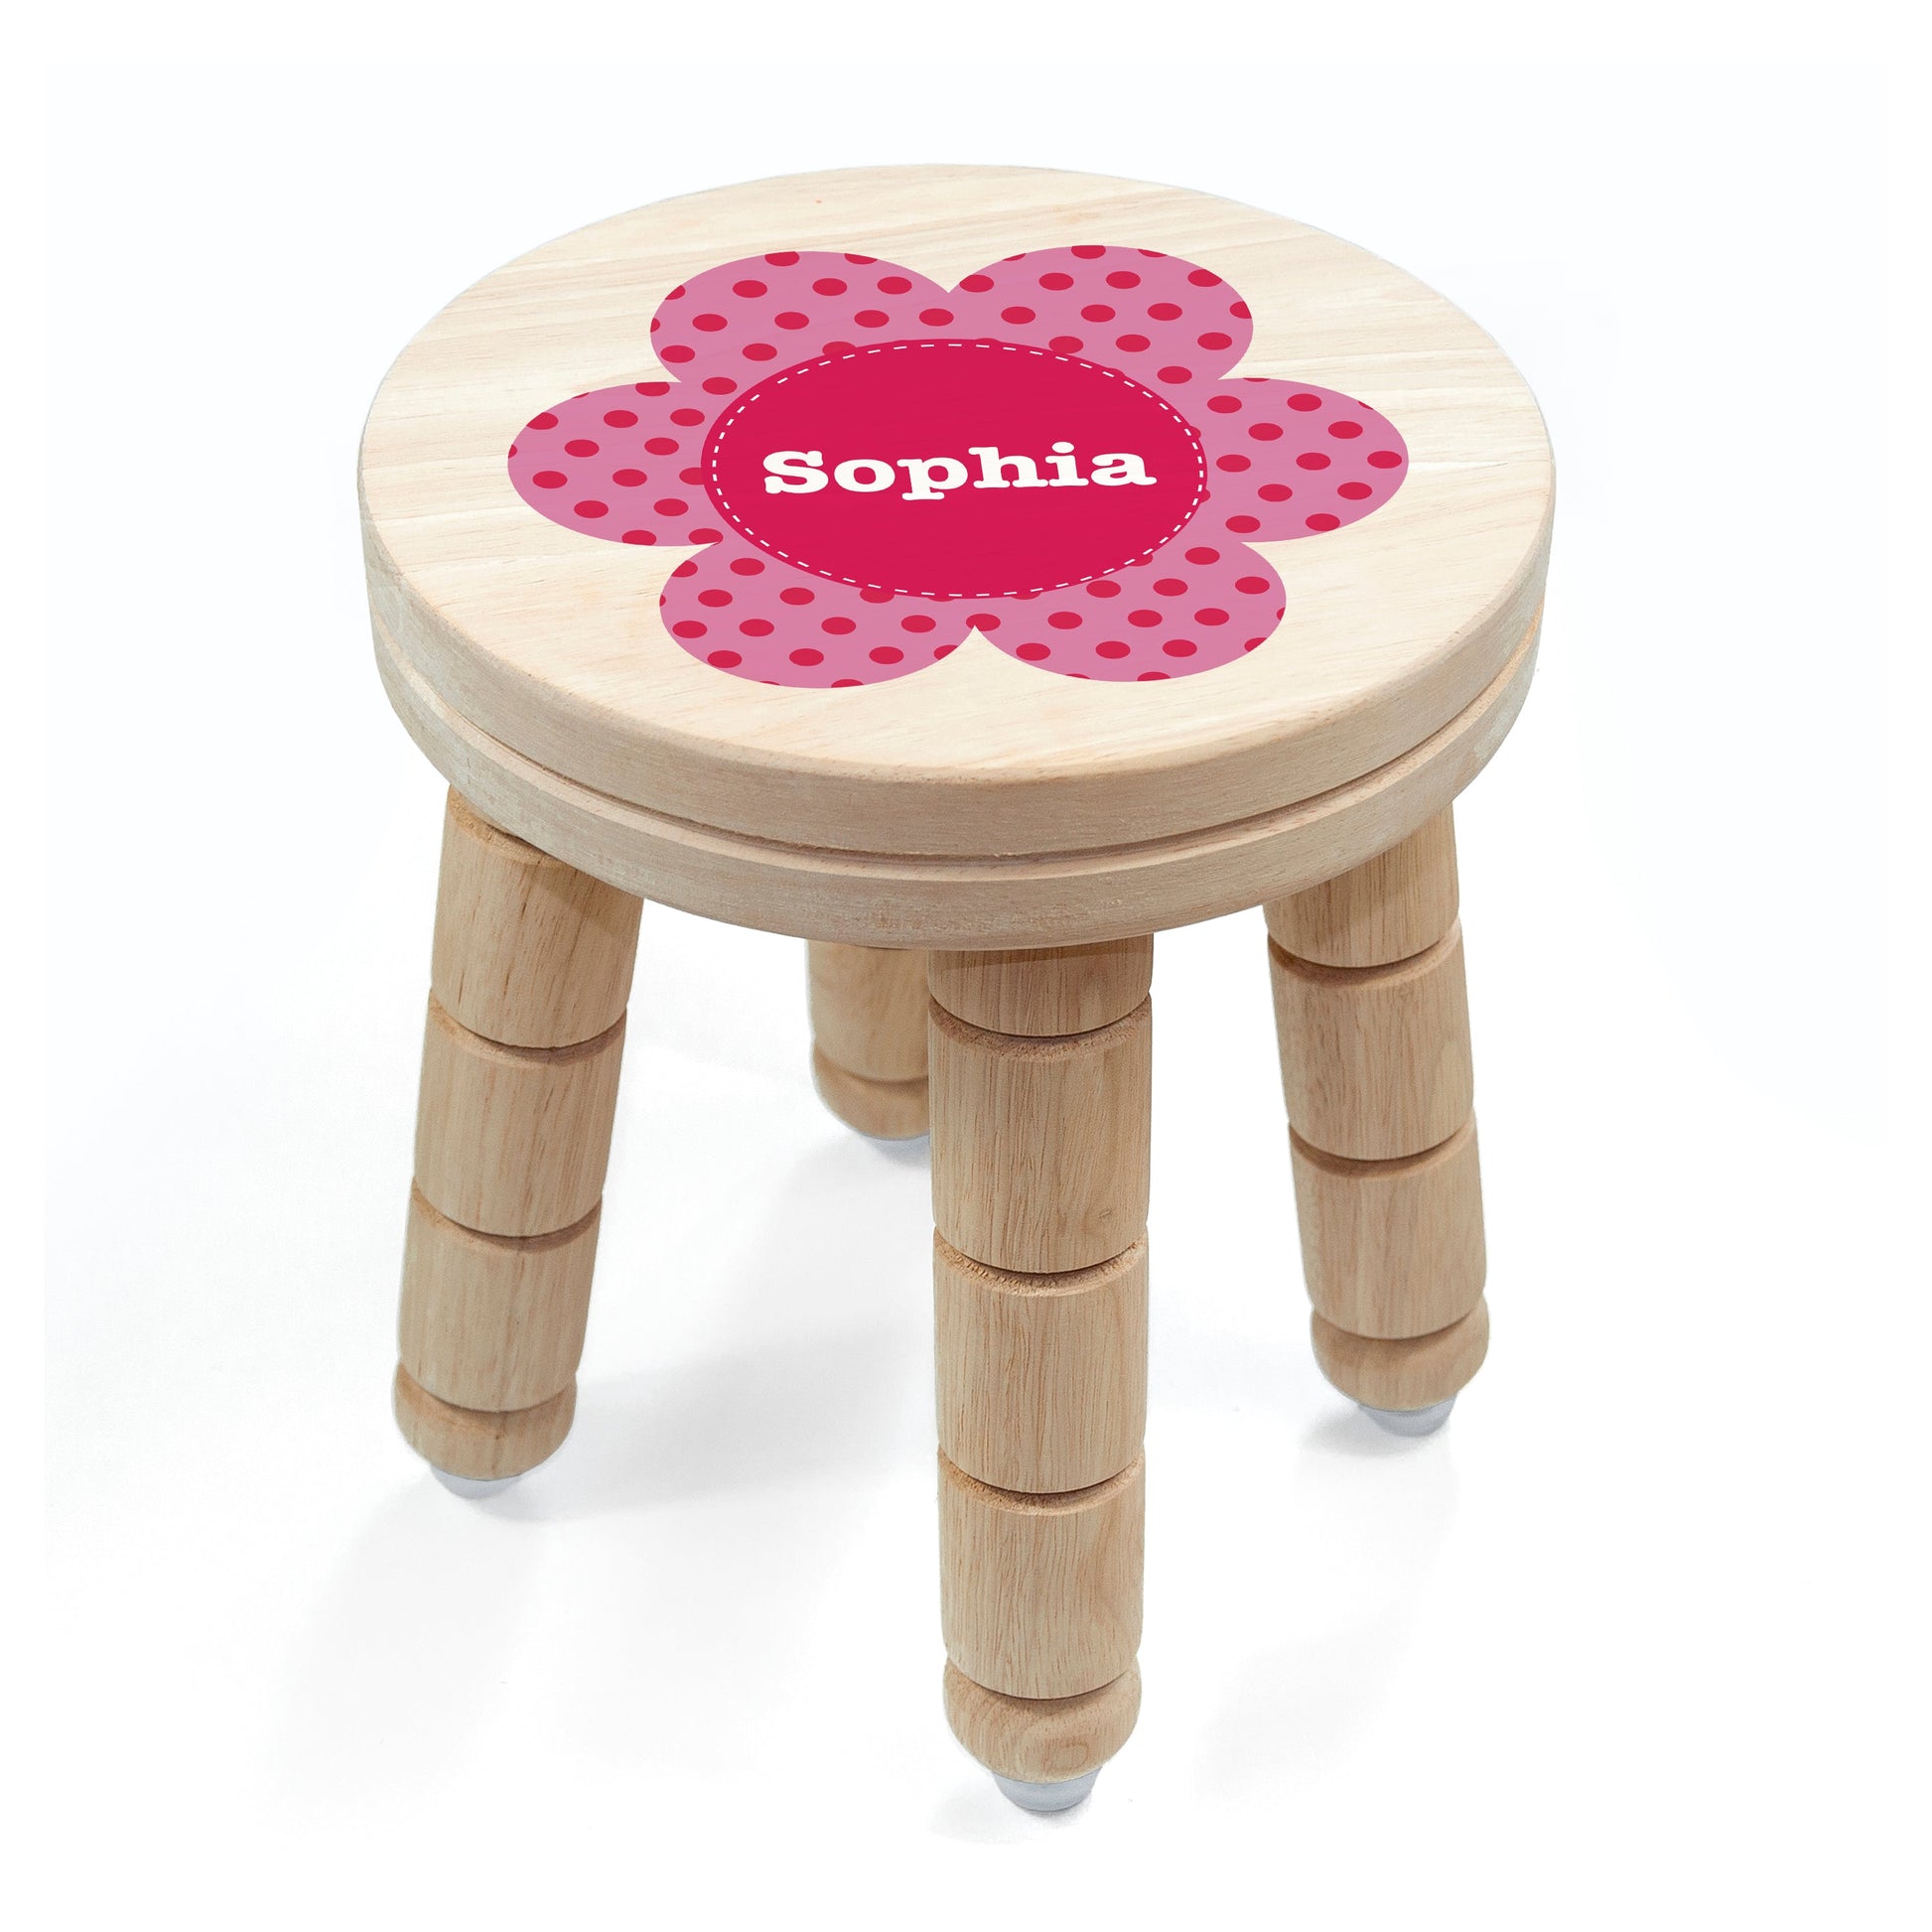 Personalized Kids Stools - Personalized Kid’s Flower Wooden Stool 